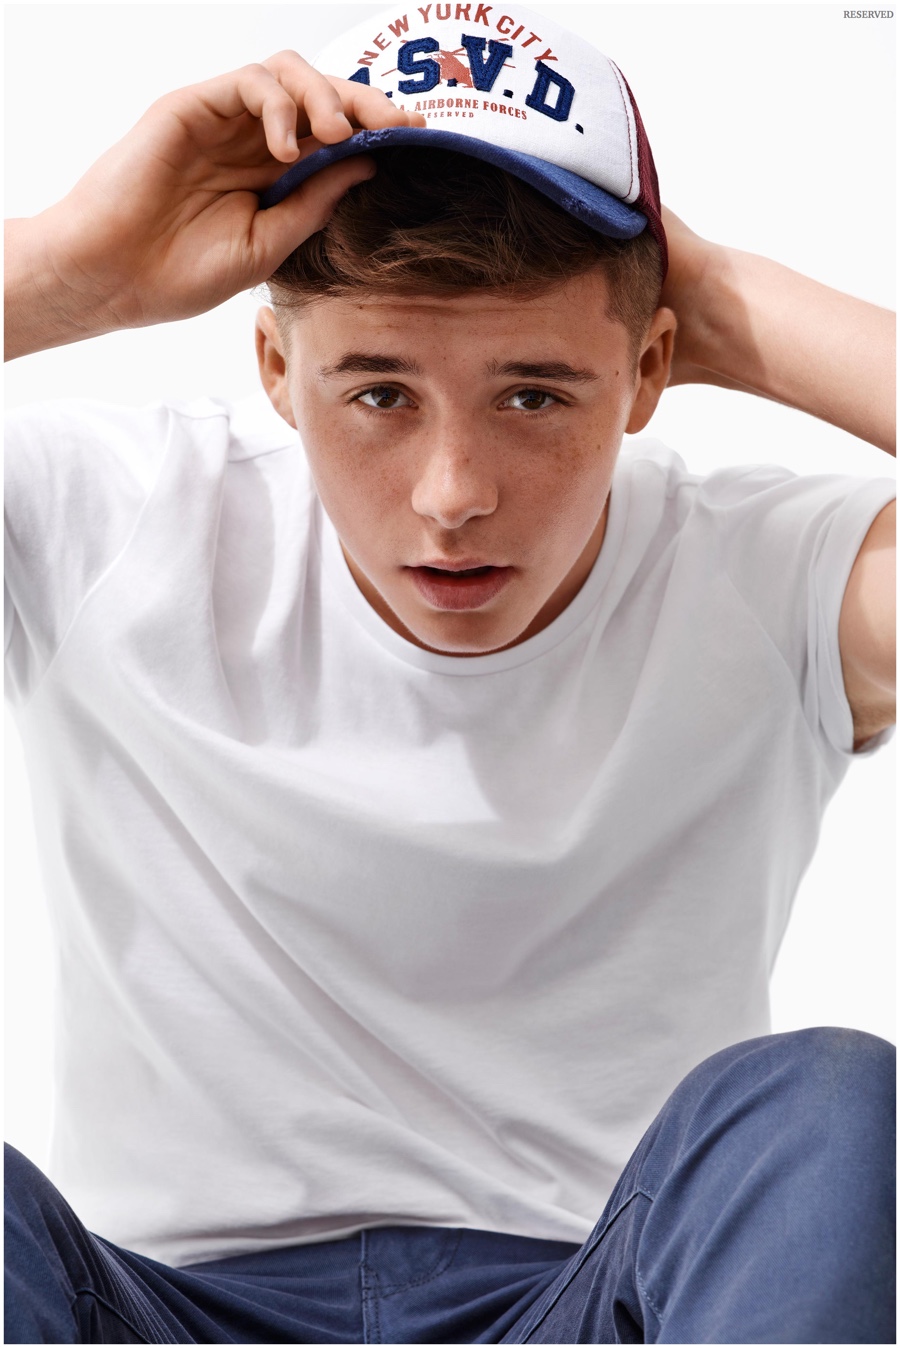 Brooklyn Beckham Reserved Campaign Spring 2015 Photo Shoot 002